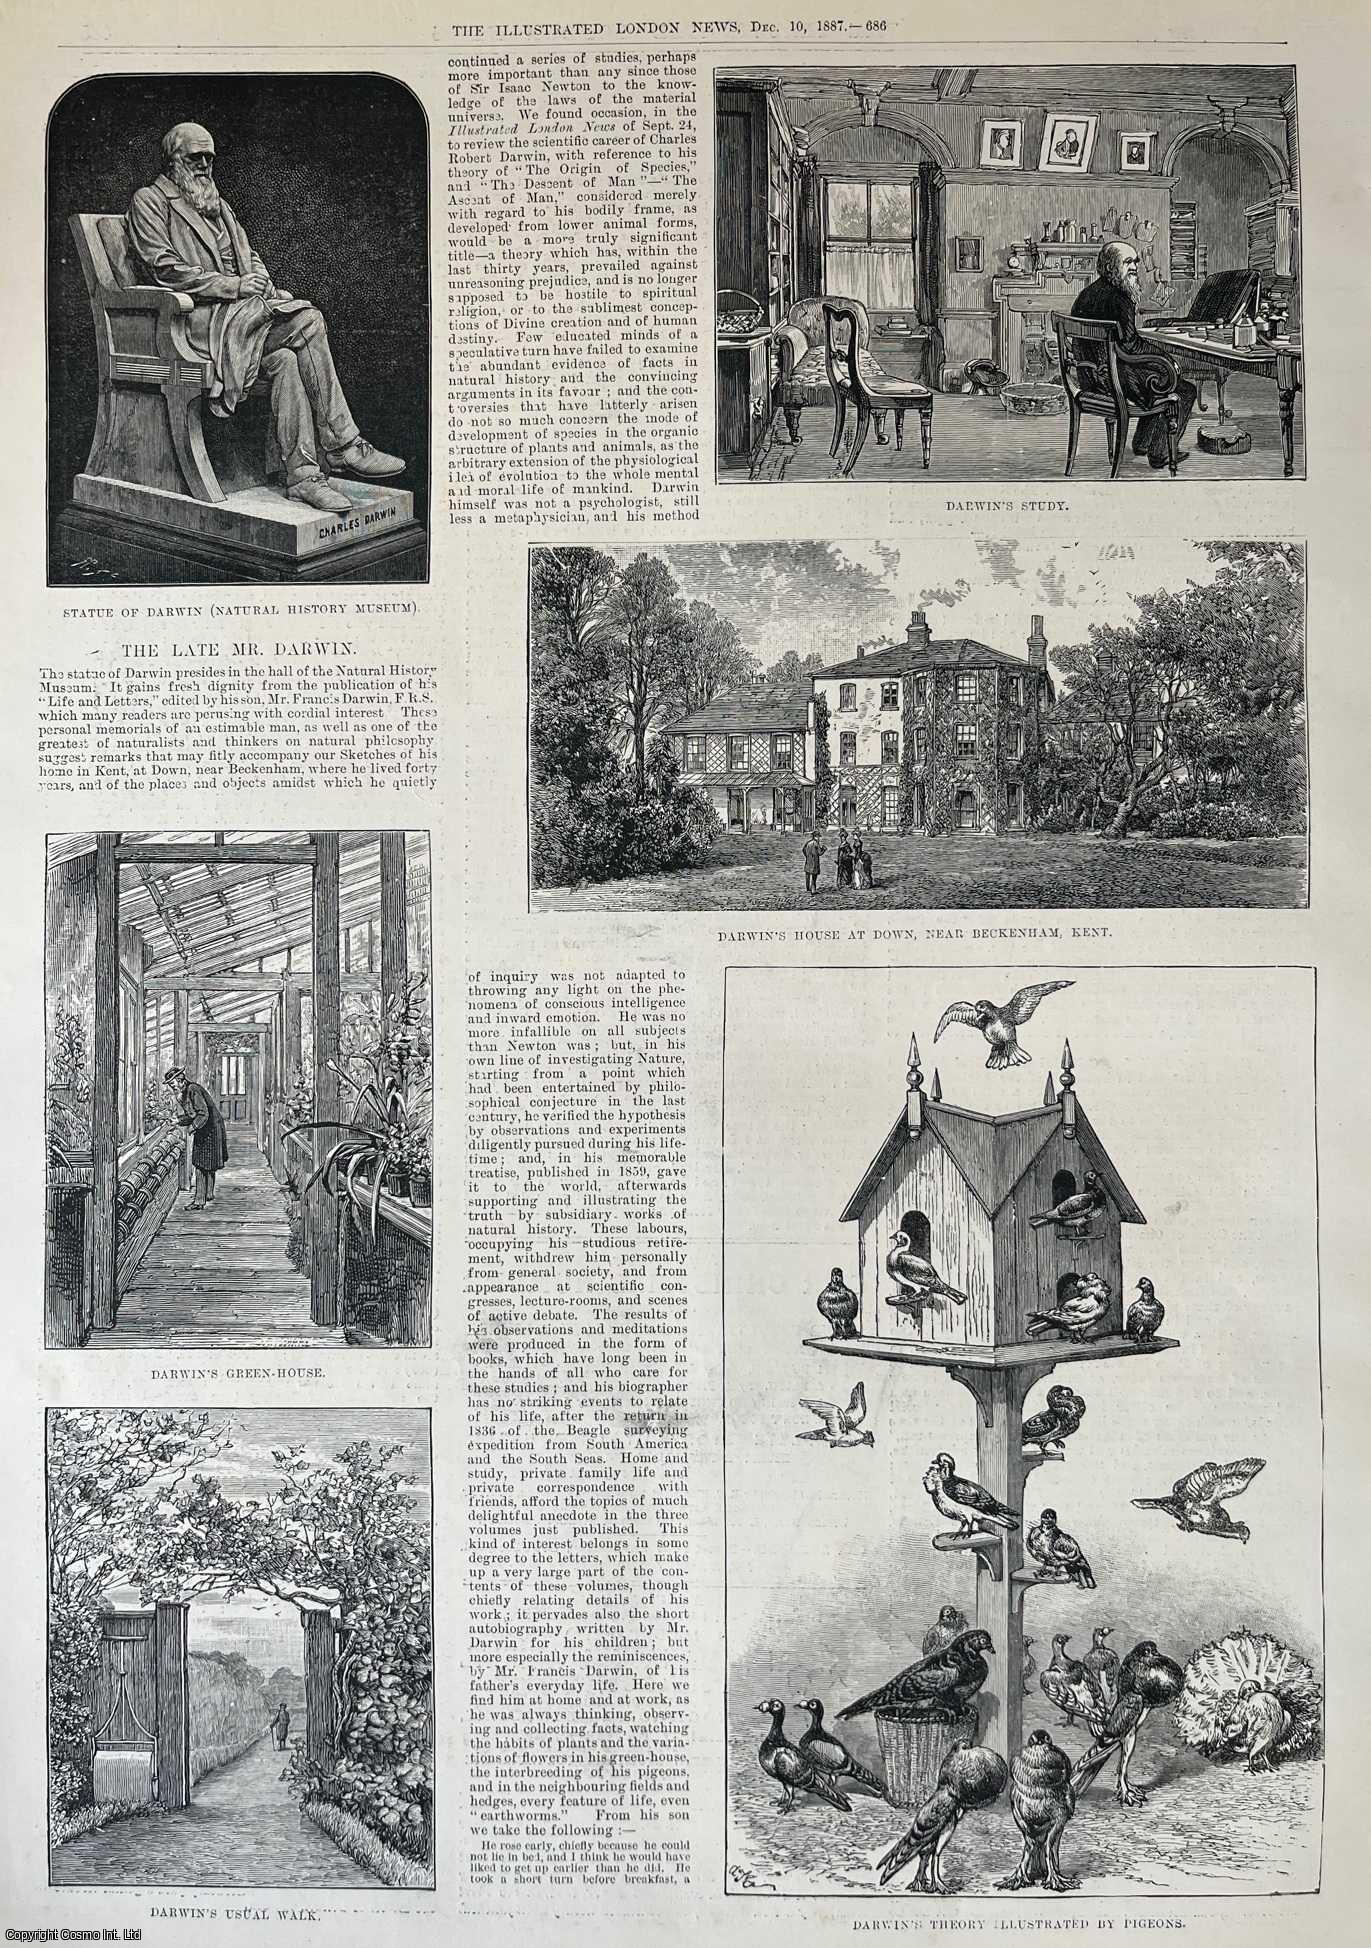 CHARLES DARWIN - Charles Darwin and Down House, Kent. A collection of original woodcut engravings, with brief accompanying text, from the Illustrated London News, 1887.